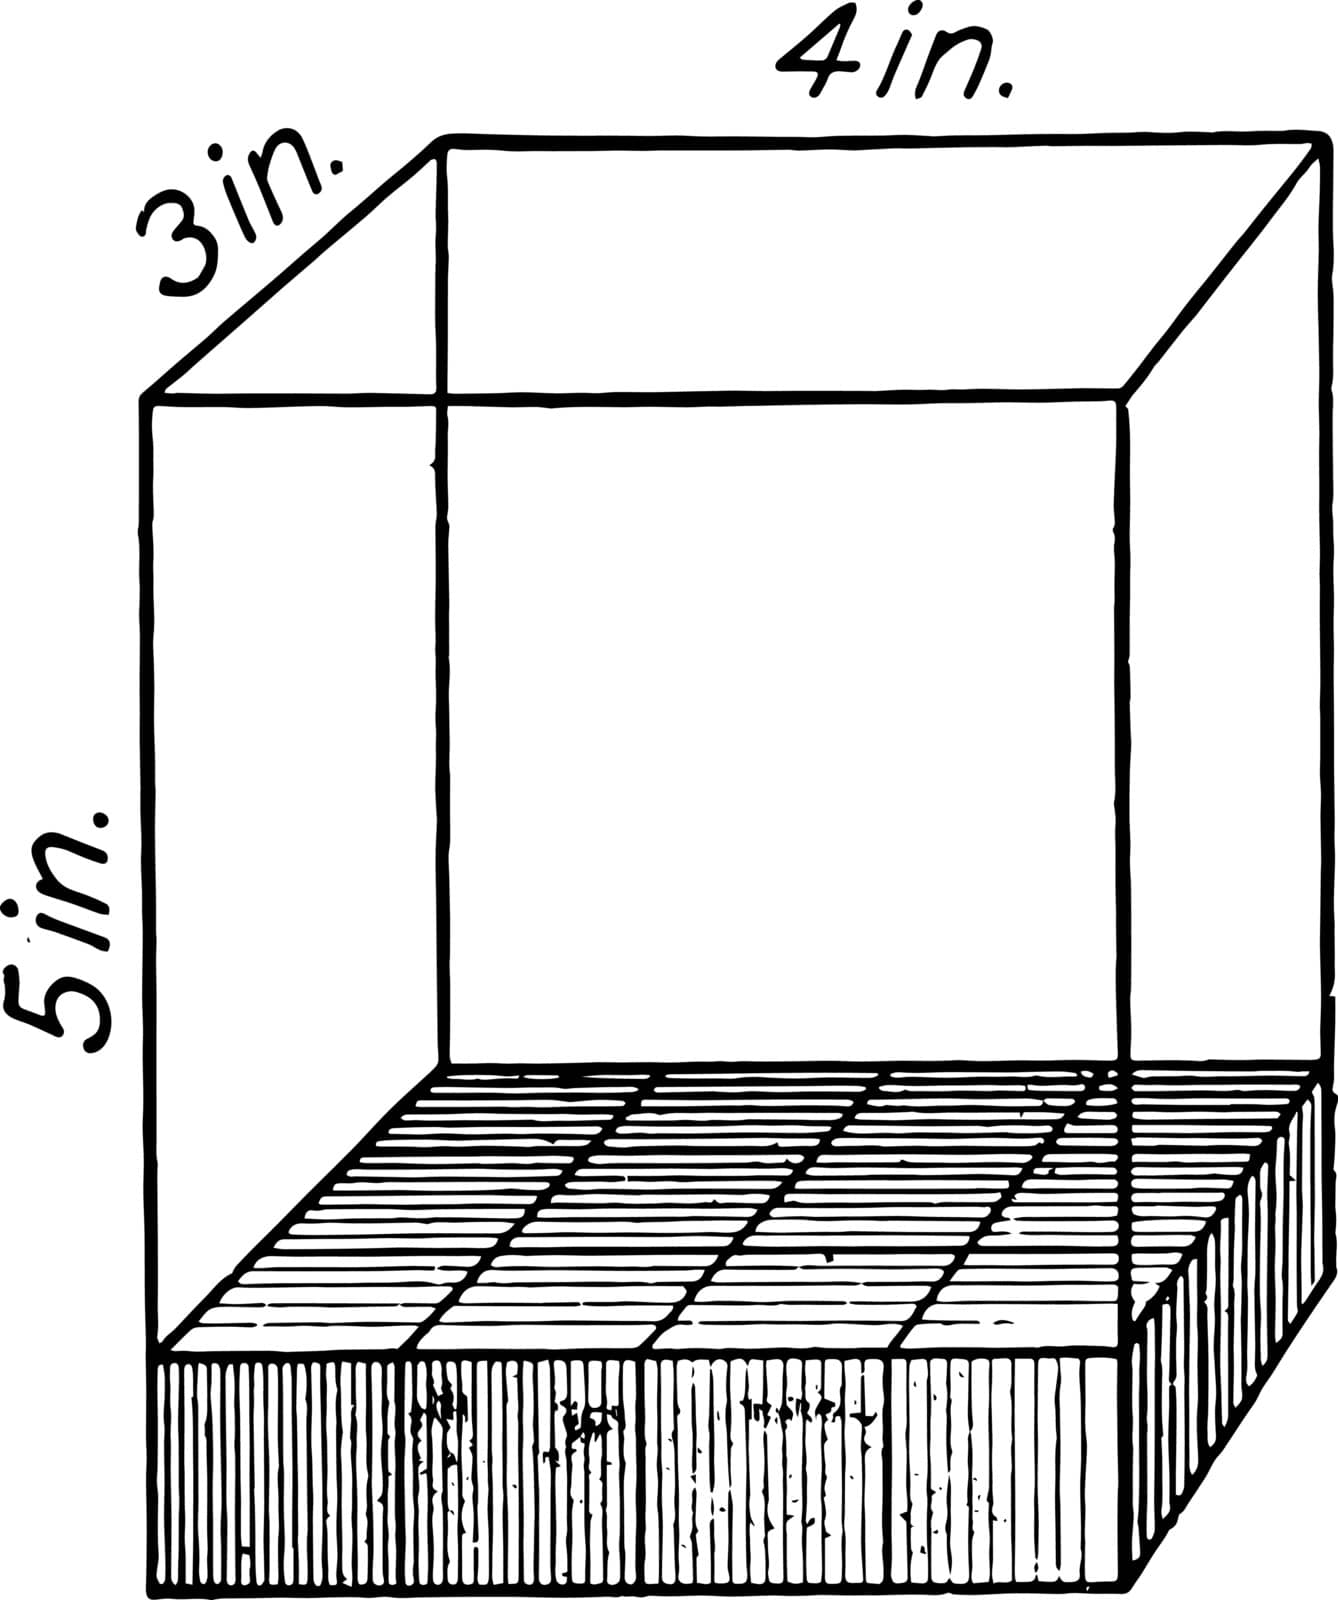 The image shows a rectangular solid of 5 by 3 by 4 inches with each cube in the solid representing one cubic inch. This can be used to explain the volume, vintage line drawing or engraving illustration.